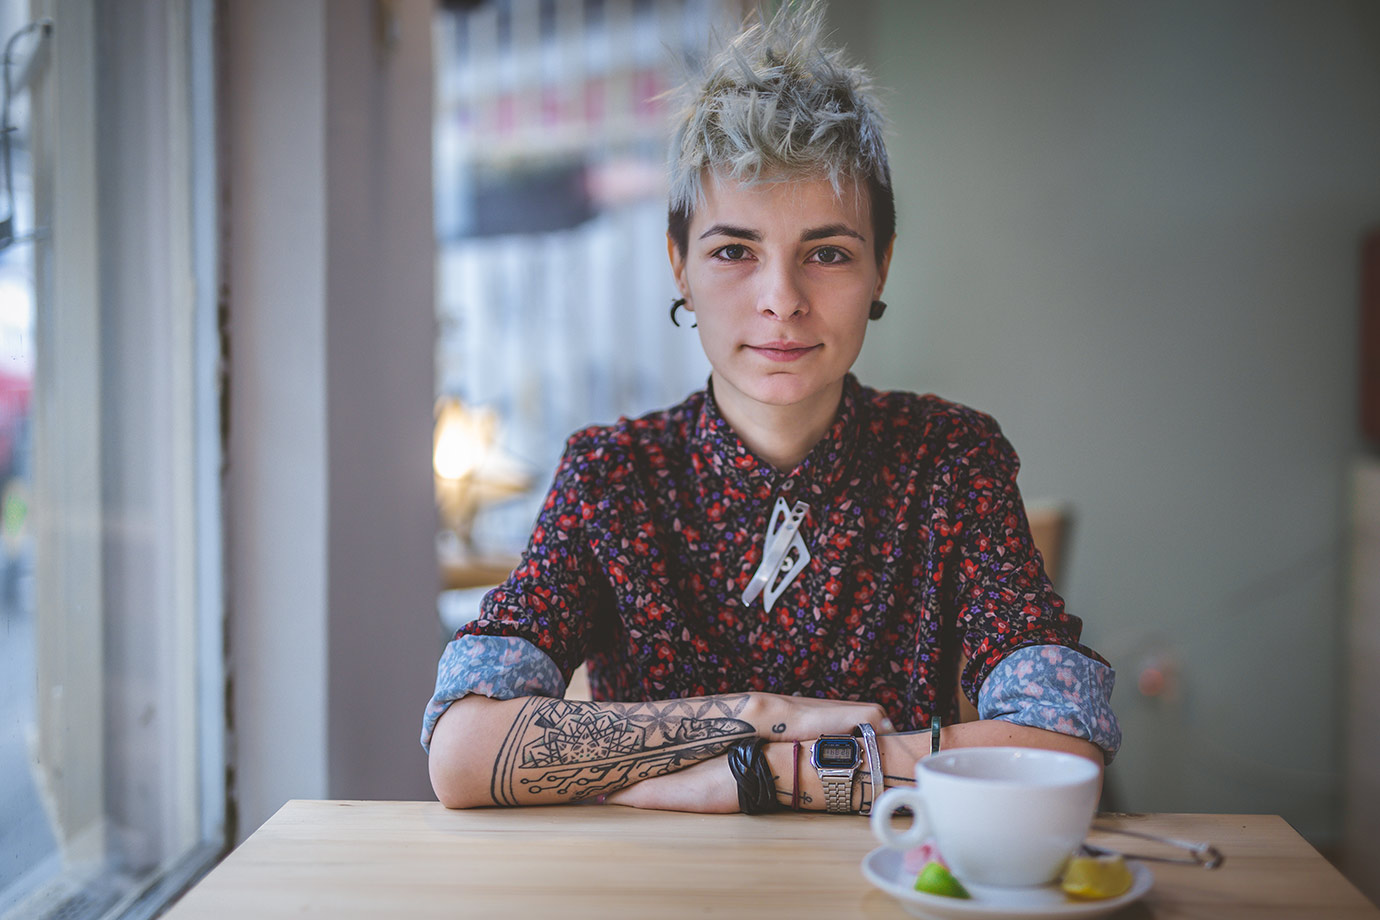 A portrait of a person sitting at a cafe table.